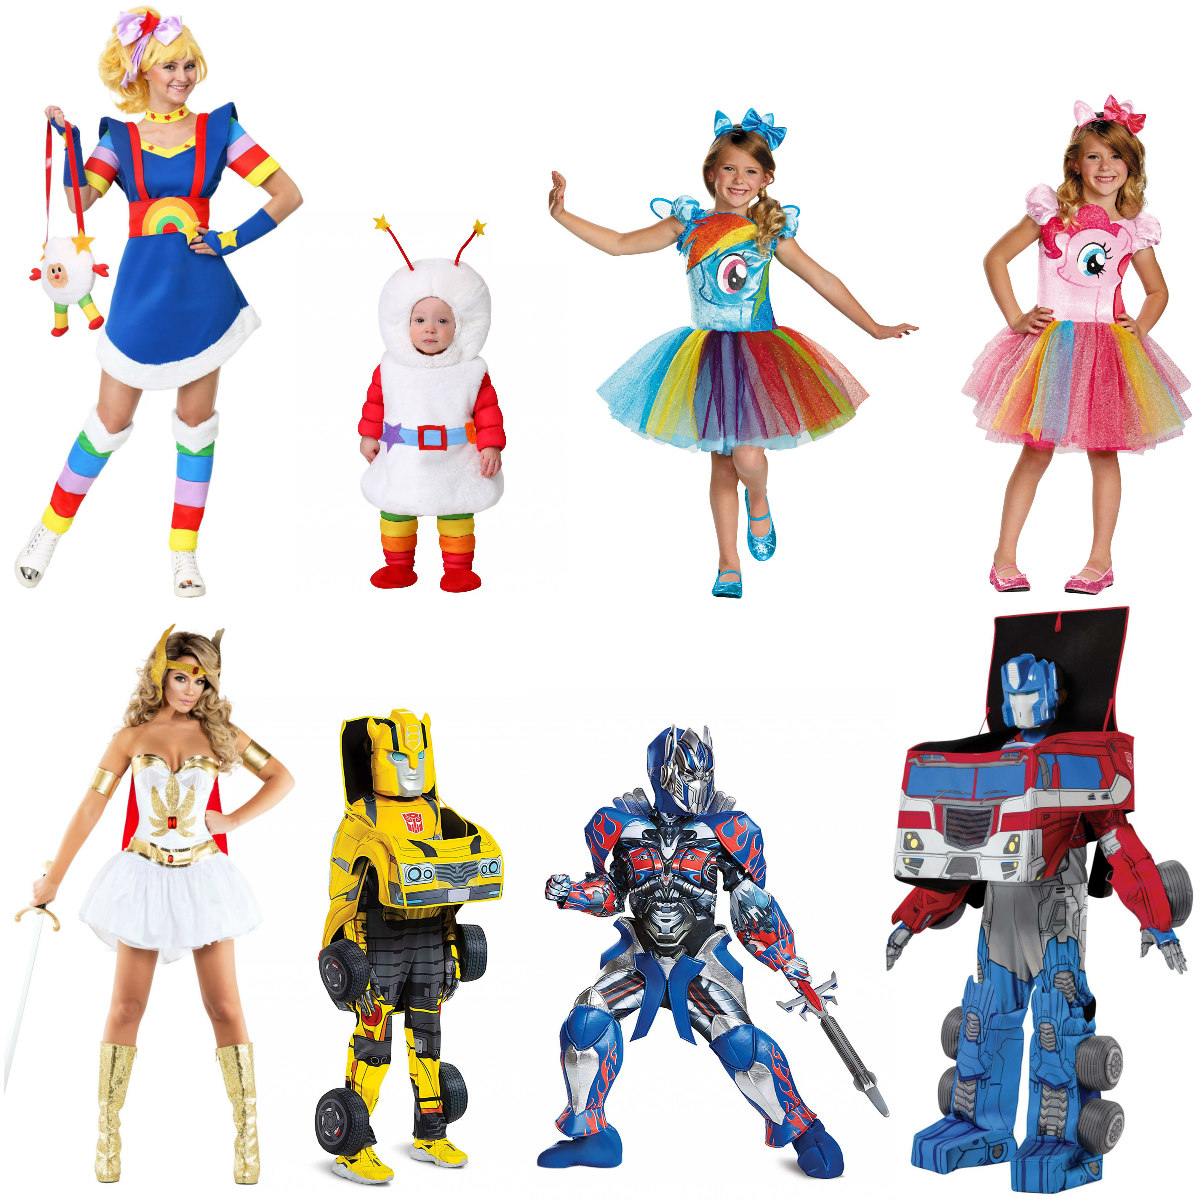 The Ultimate Cartoon Character Costumes for an Animated Saturday Morning [ Costume Guide]  Blog